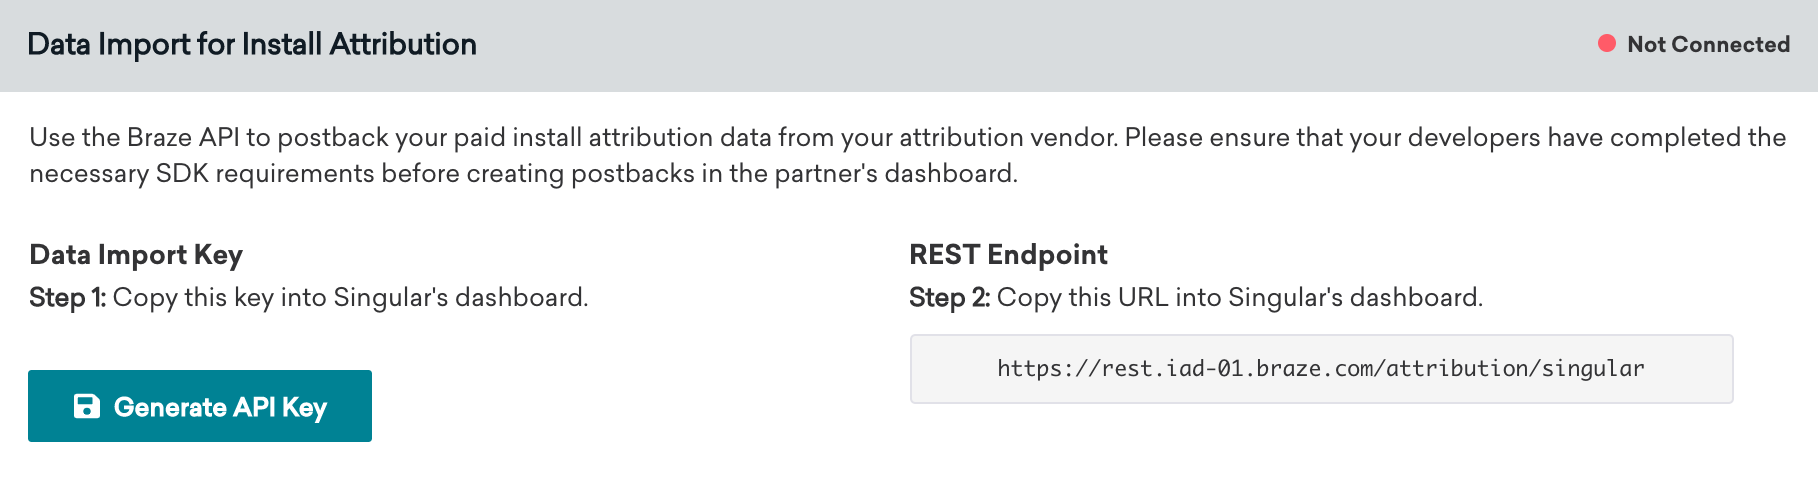 This image shows the "Data Import for Install Attribution" box found in the Singular technology page. In this box, you are shown the data import key and the REST endpoint.